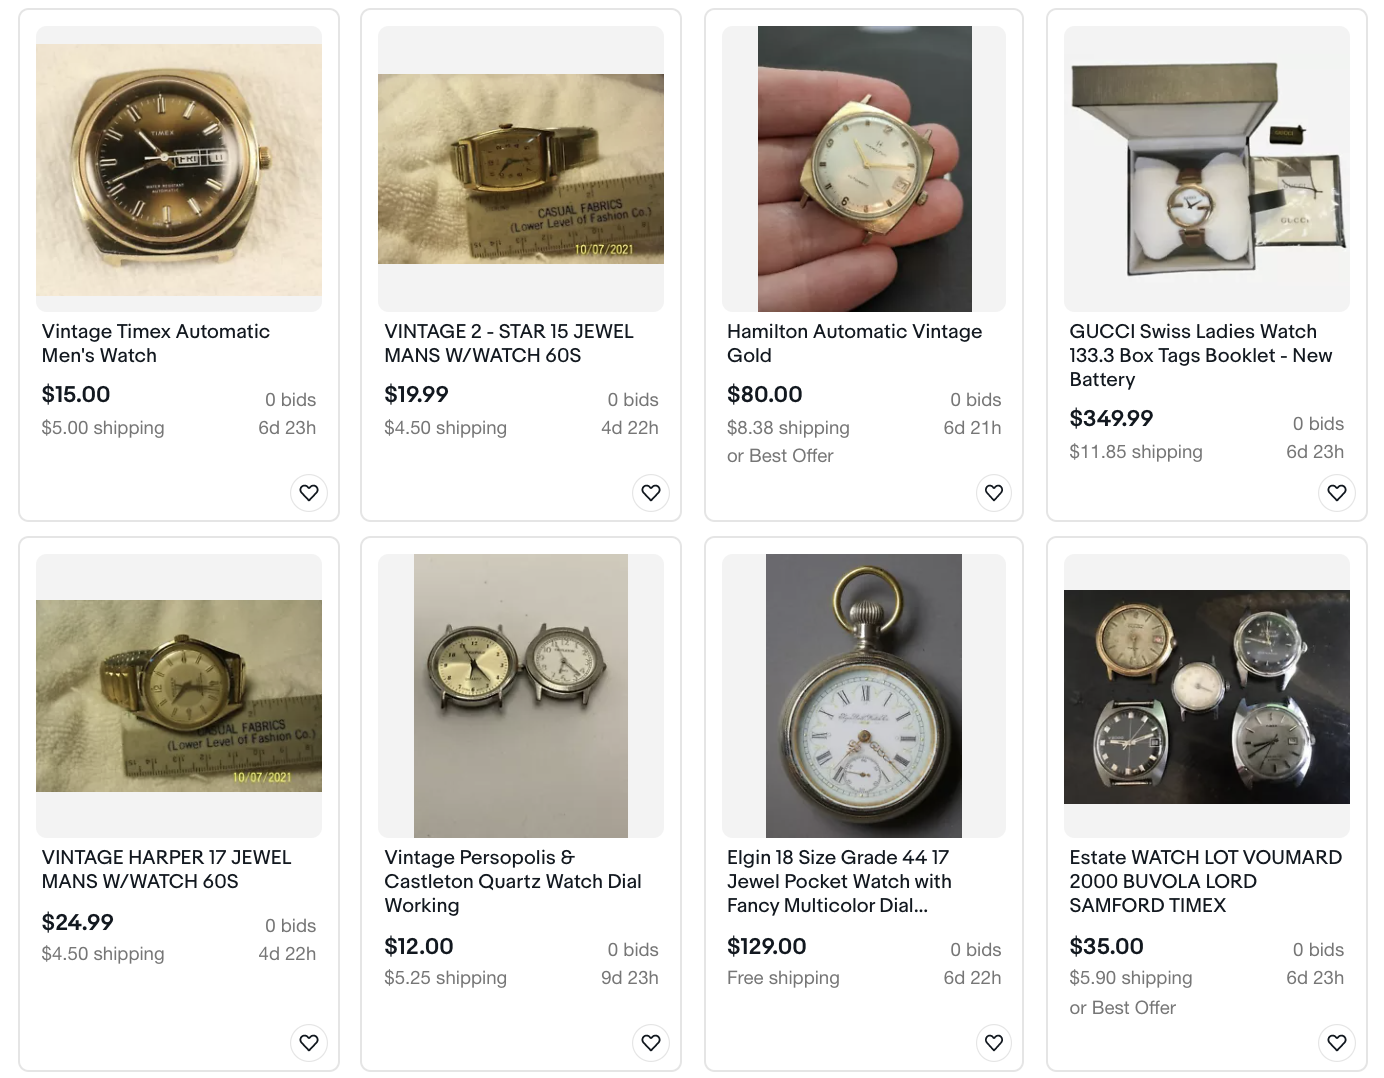 Top tips to selling on eBay: search results for vintage watches 